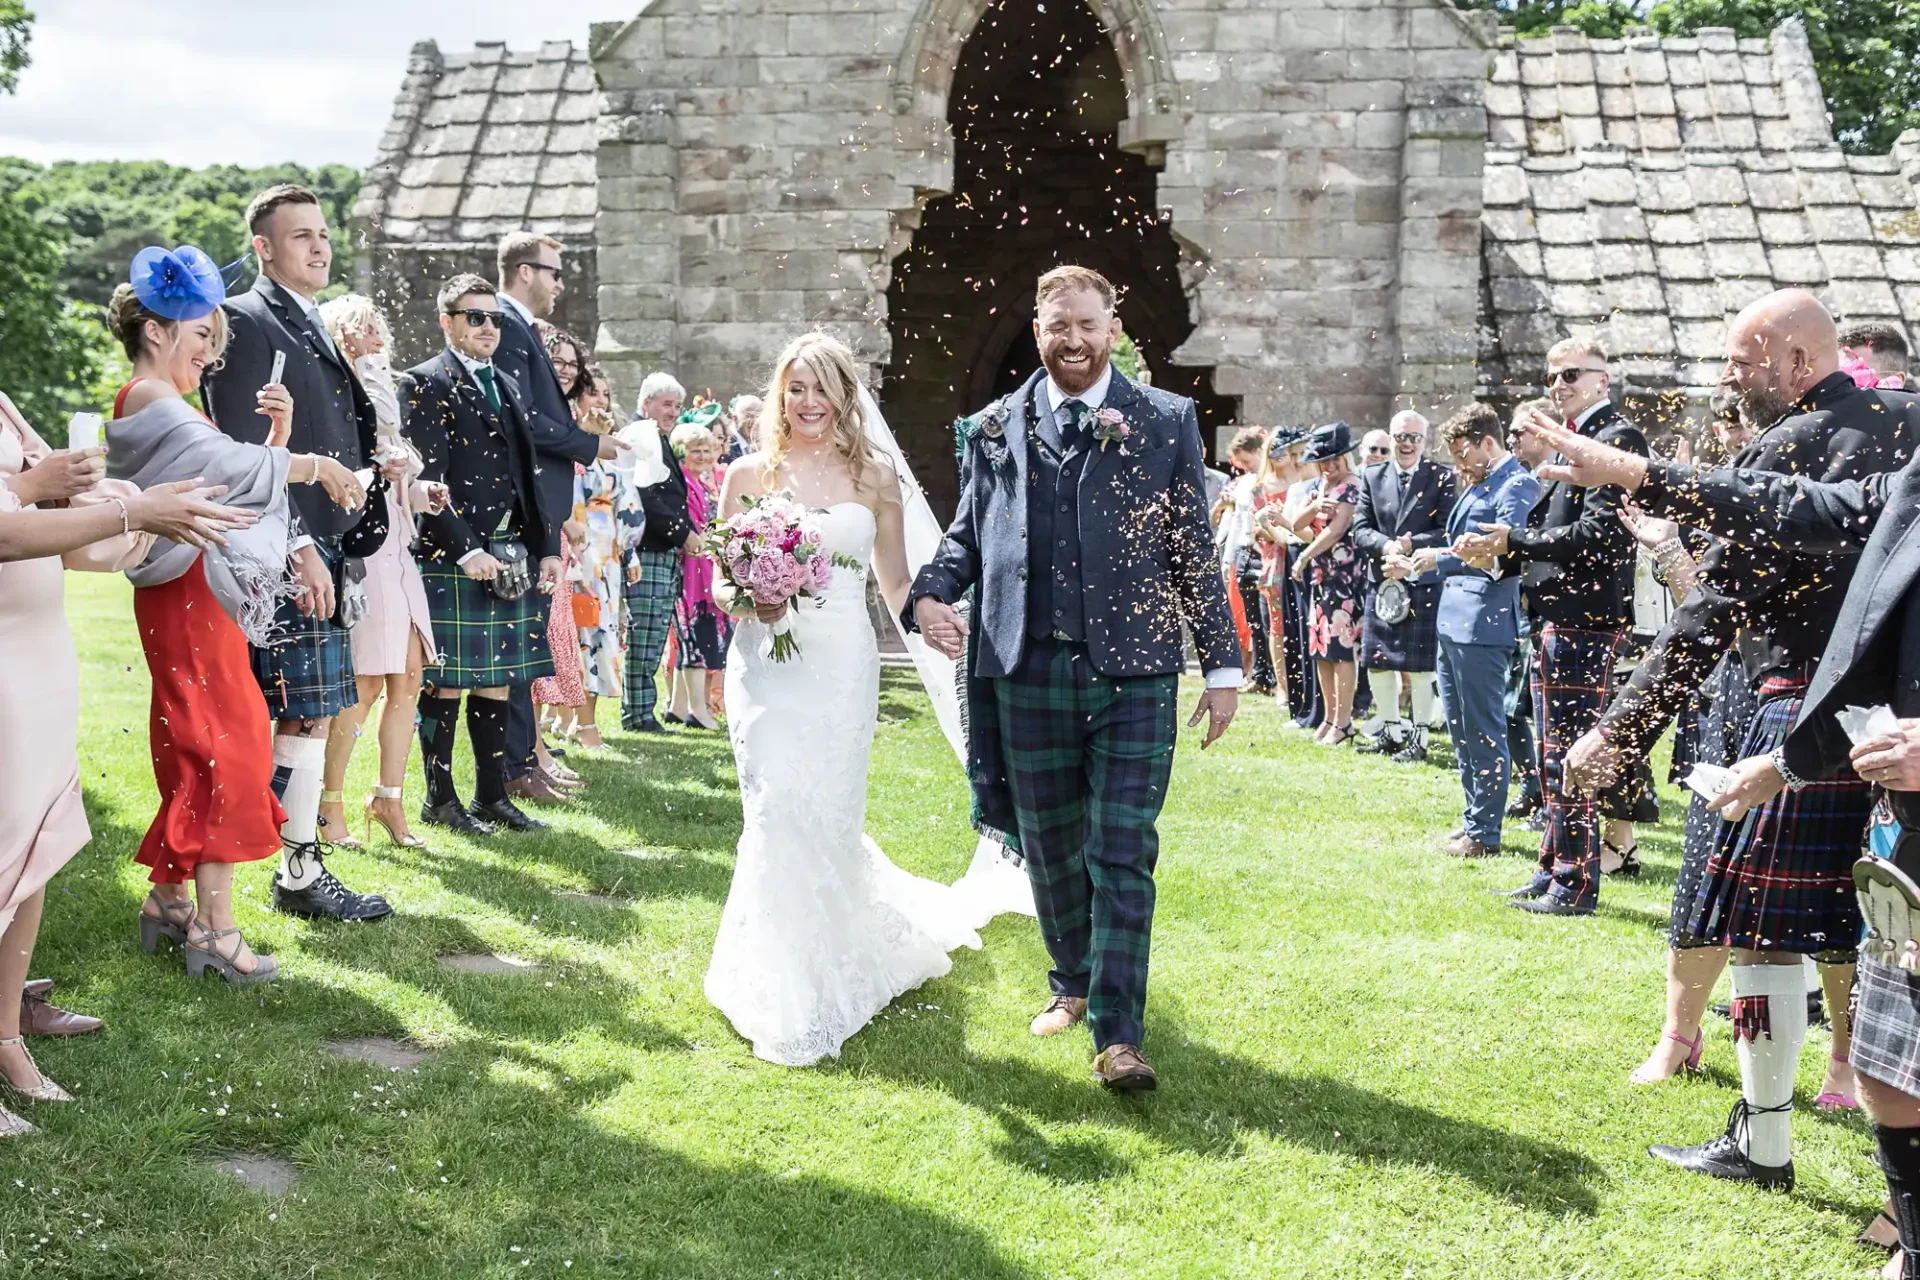 Bride and groom smiling and walking hand-in-hand while guests throw confetti at a sunny outdoor wedding ceremony.